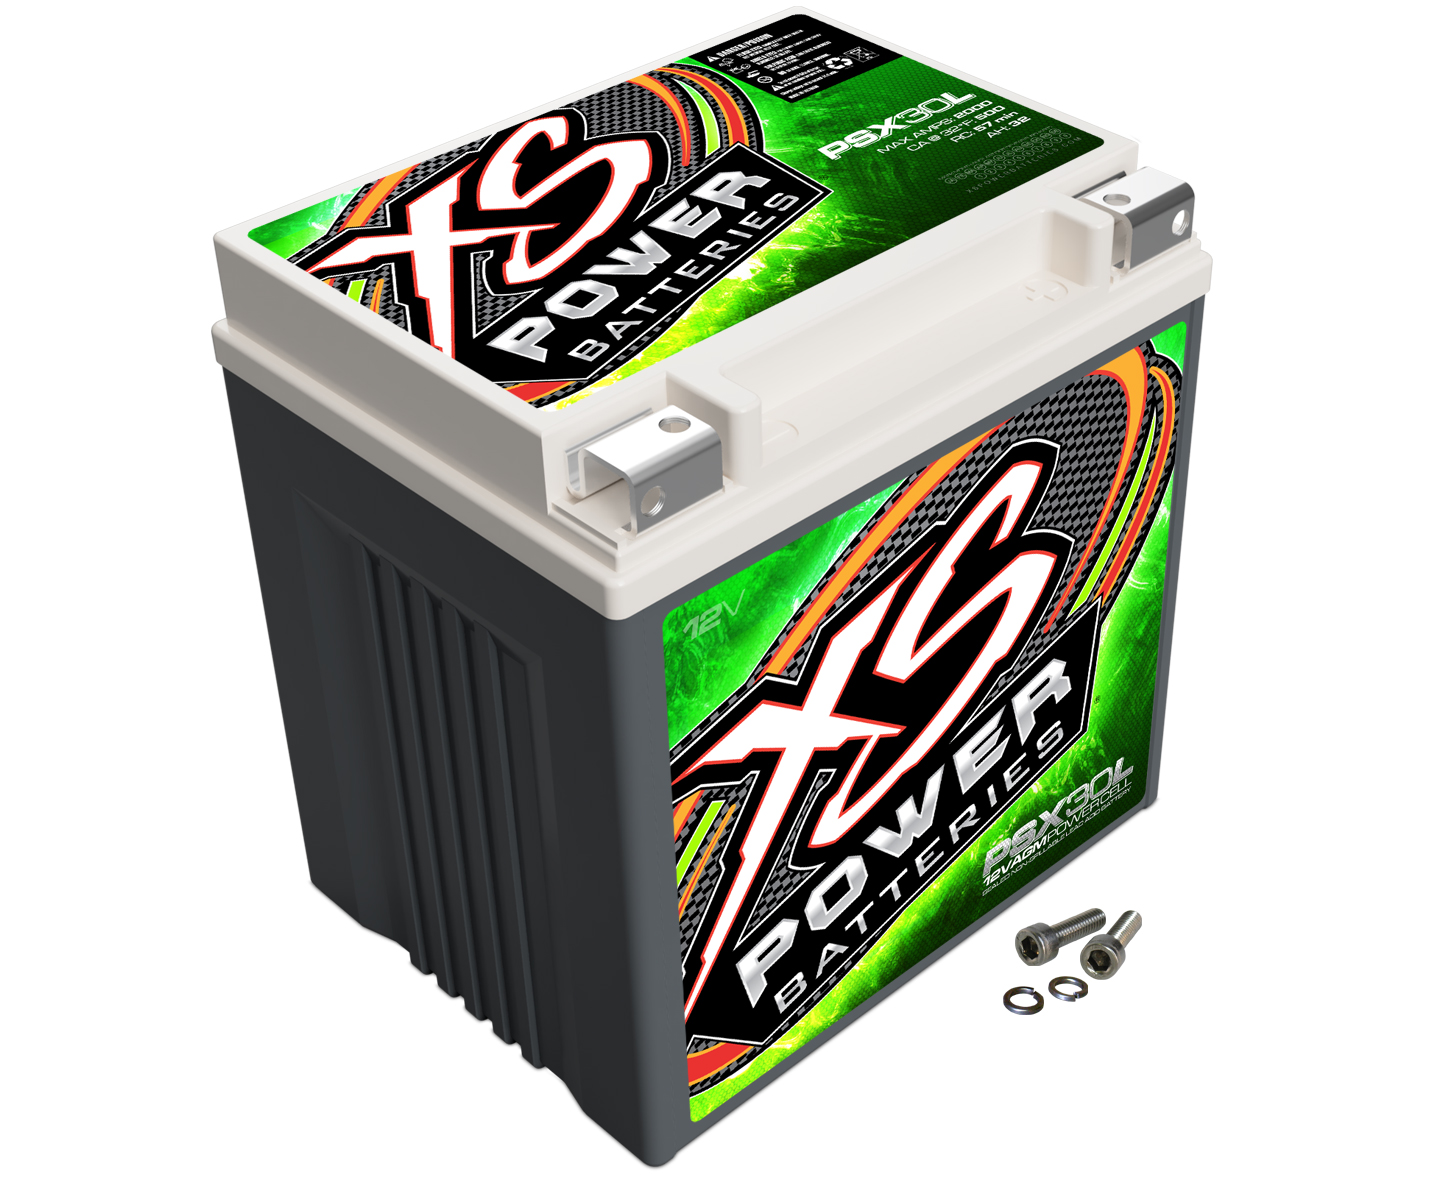 Will the PSX30L power my Harley's 800w and 2000w aftermarket amps?